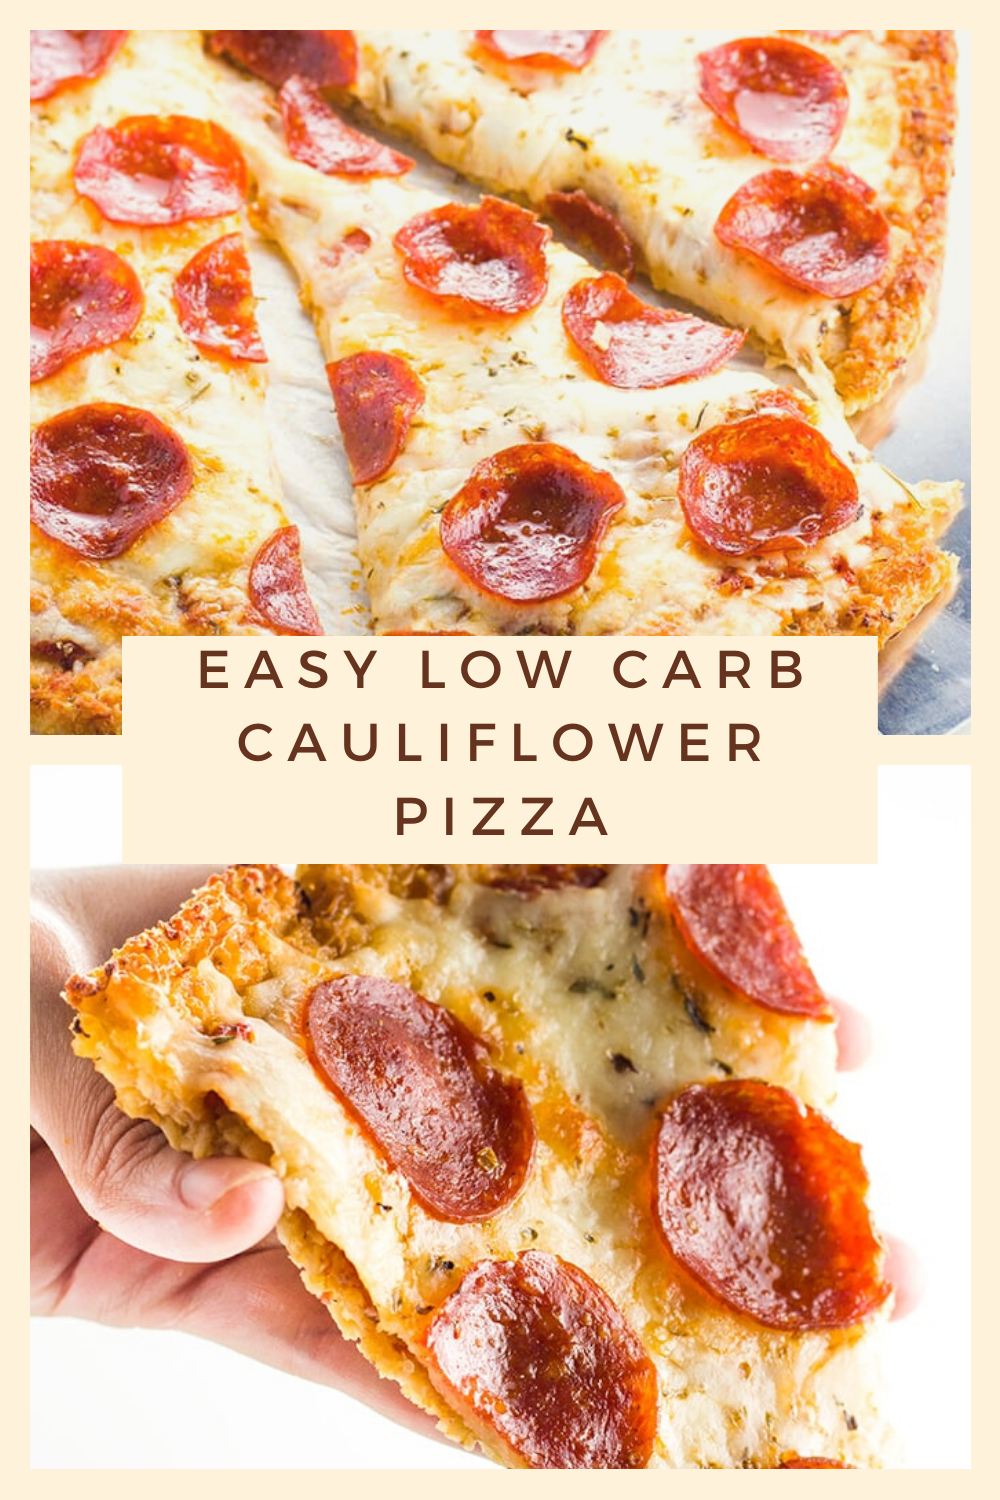 EASY LOW CARB CAULIFLOWER PIZZA CRUST RECIPE | Ease Recipes